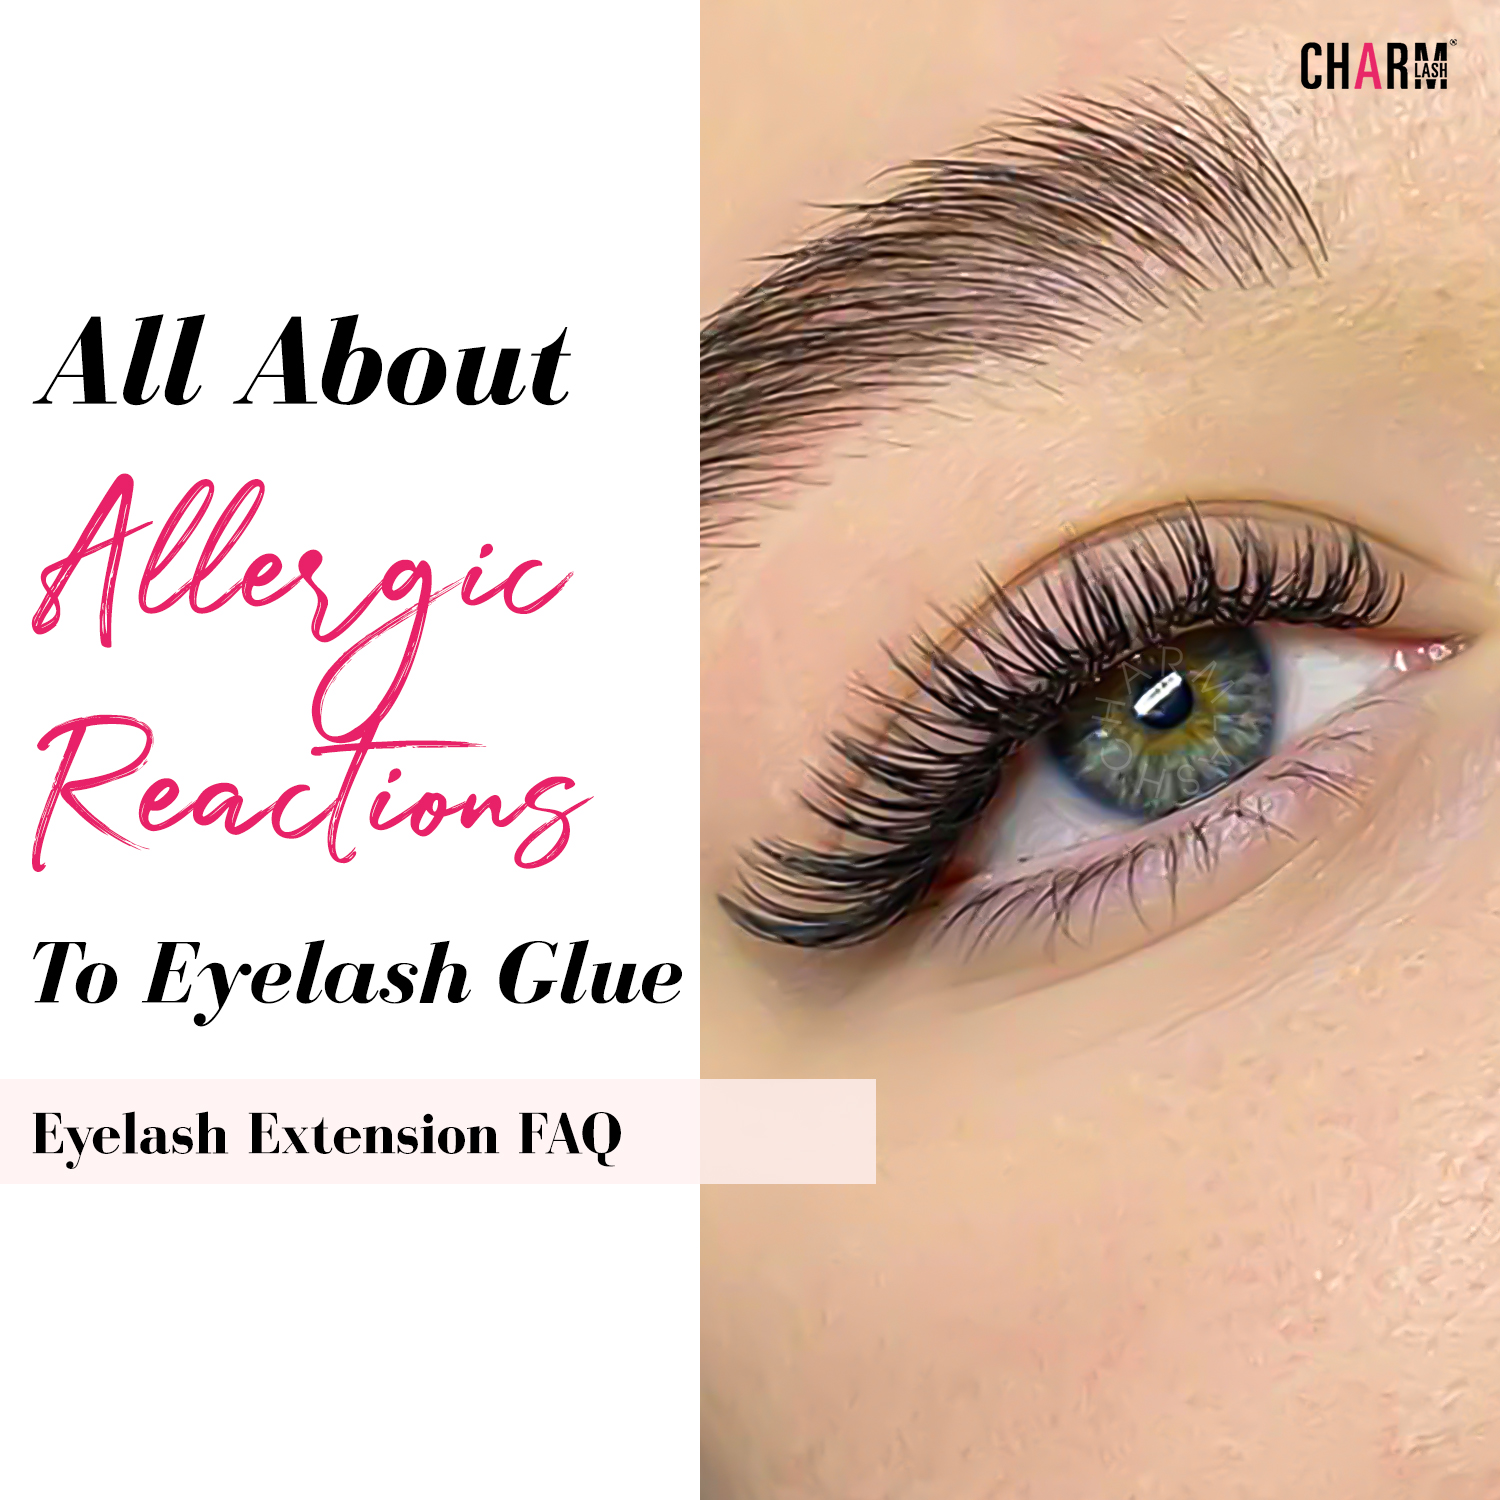 All about allergy to lash glue